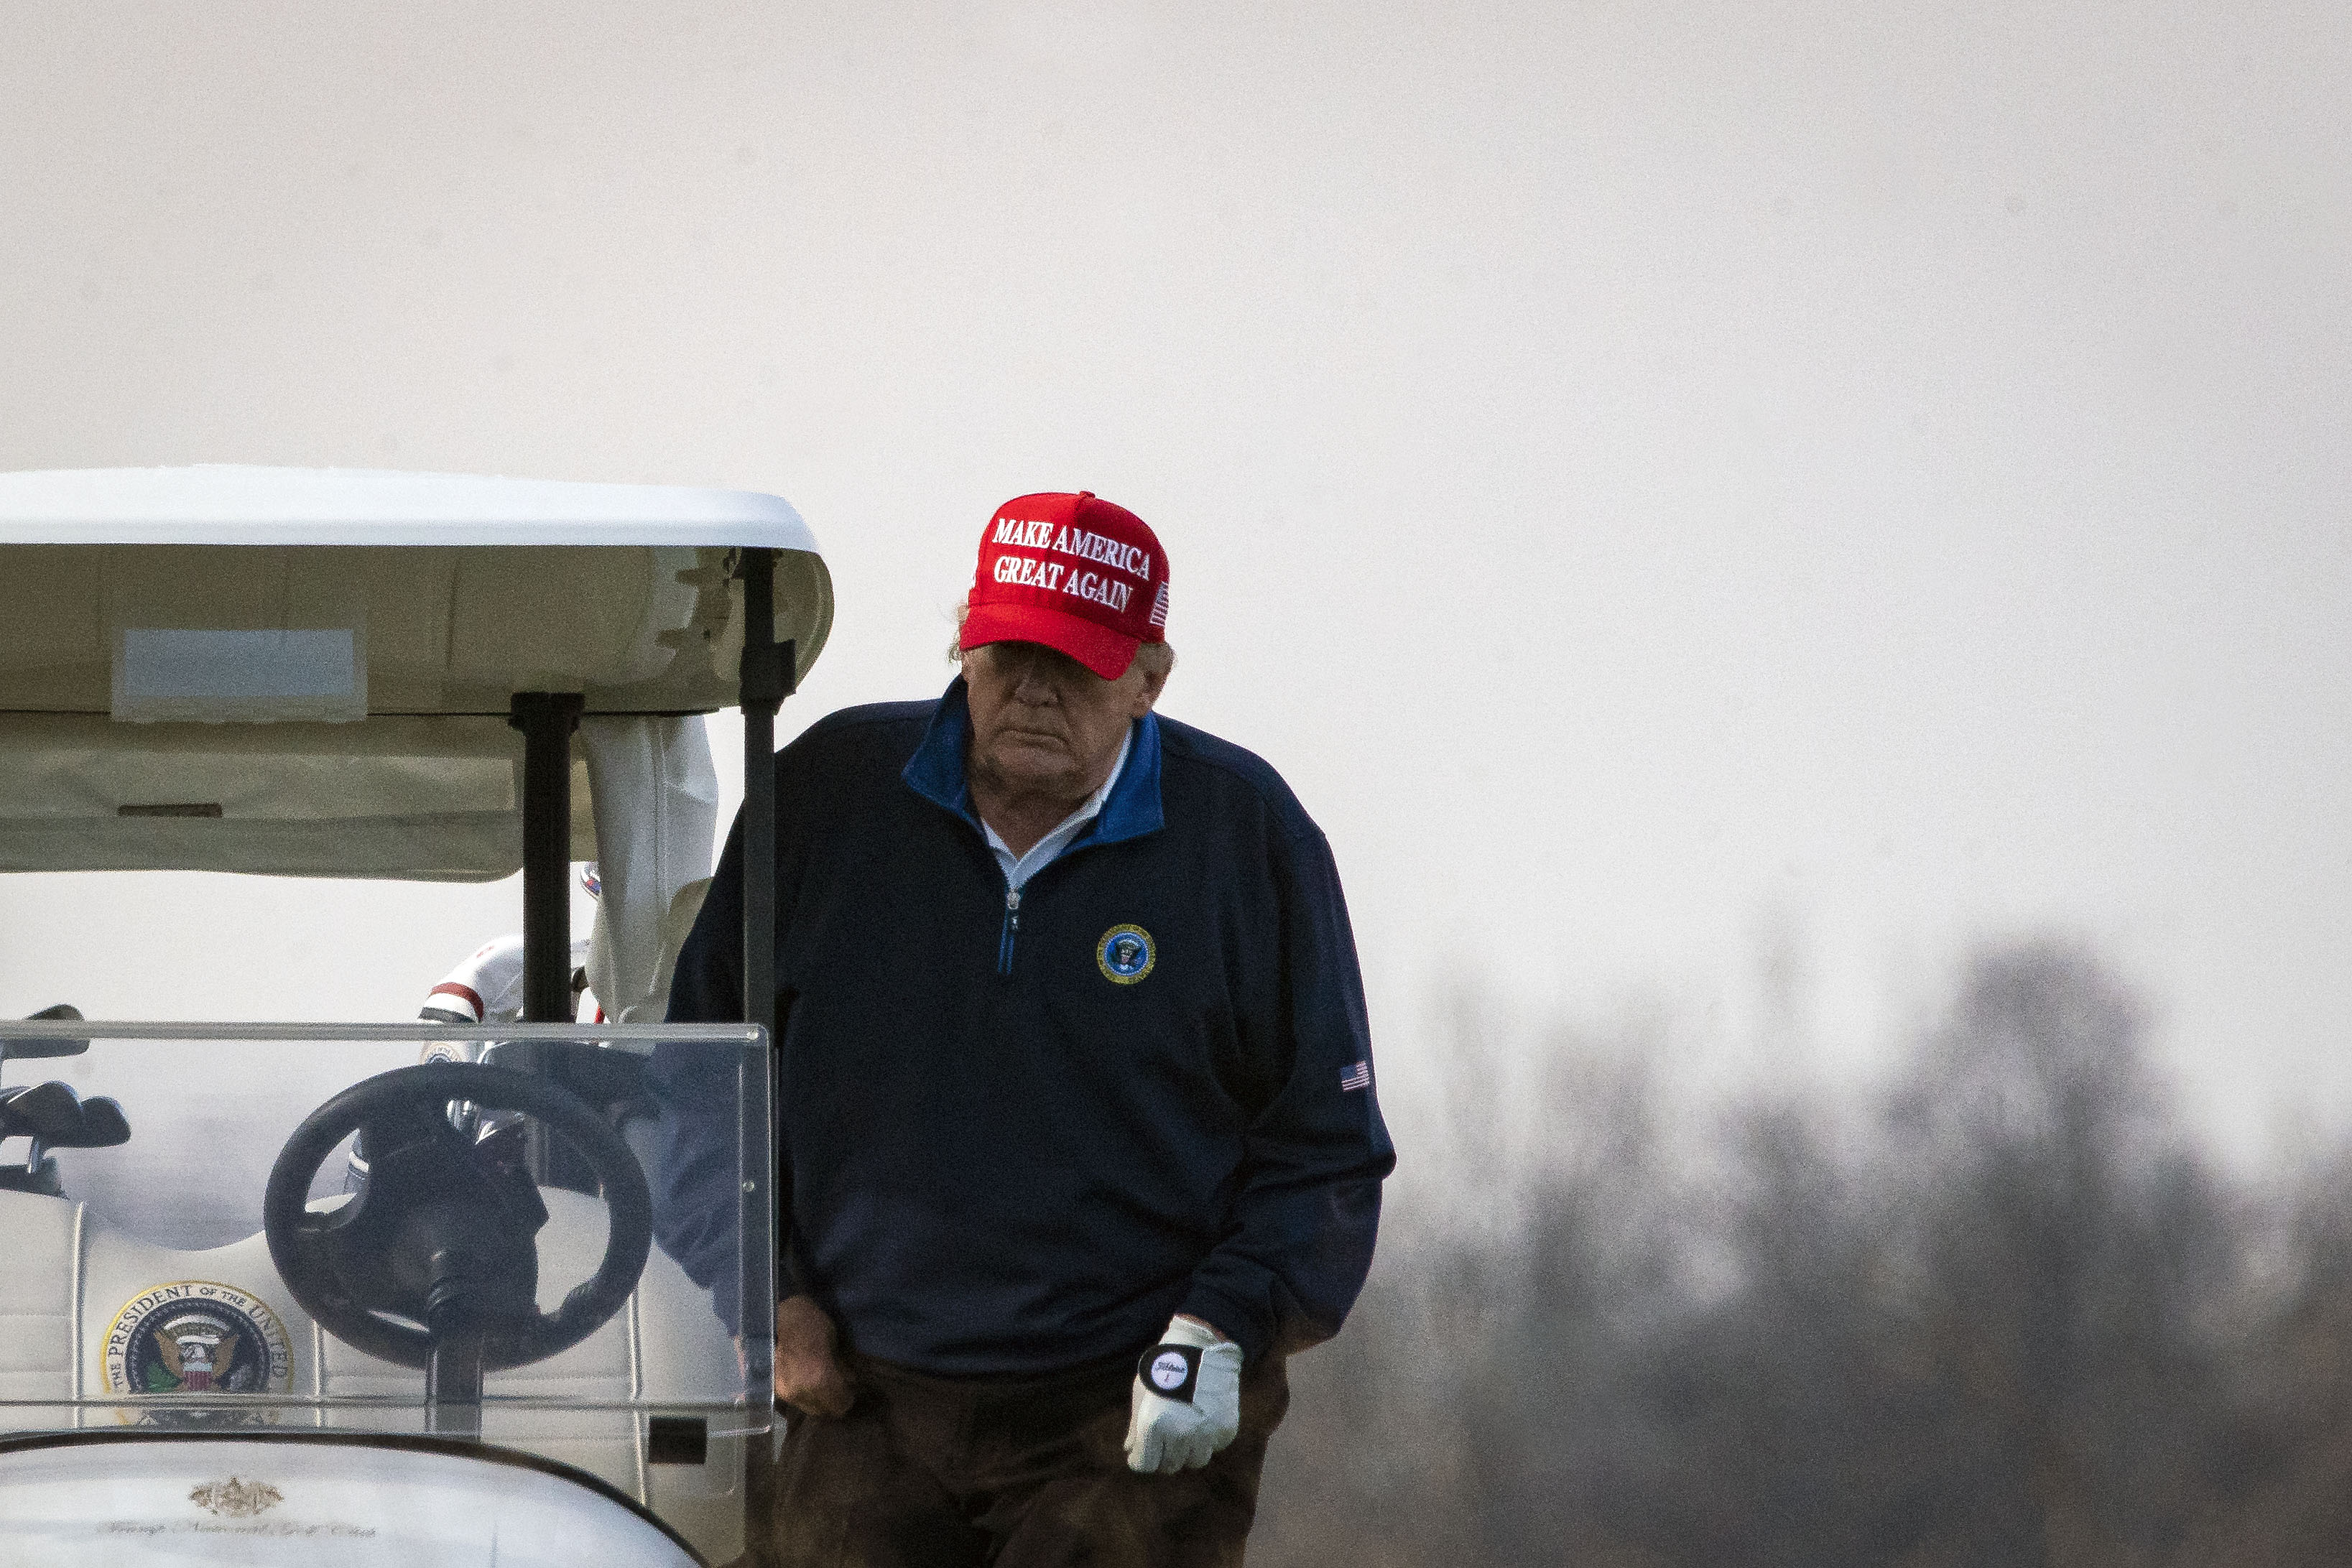 Trump, in a navy blue windbreaker featuring the seal of the president of the US and a red “Make America Great Again” baseball cap, climbs behind the wheel of a white golf cart on a cloudy day.